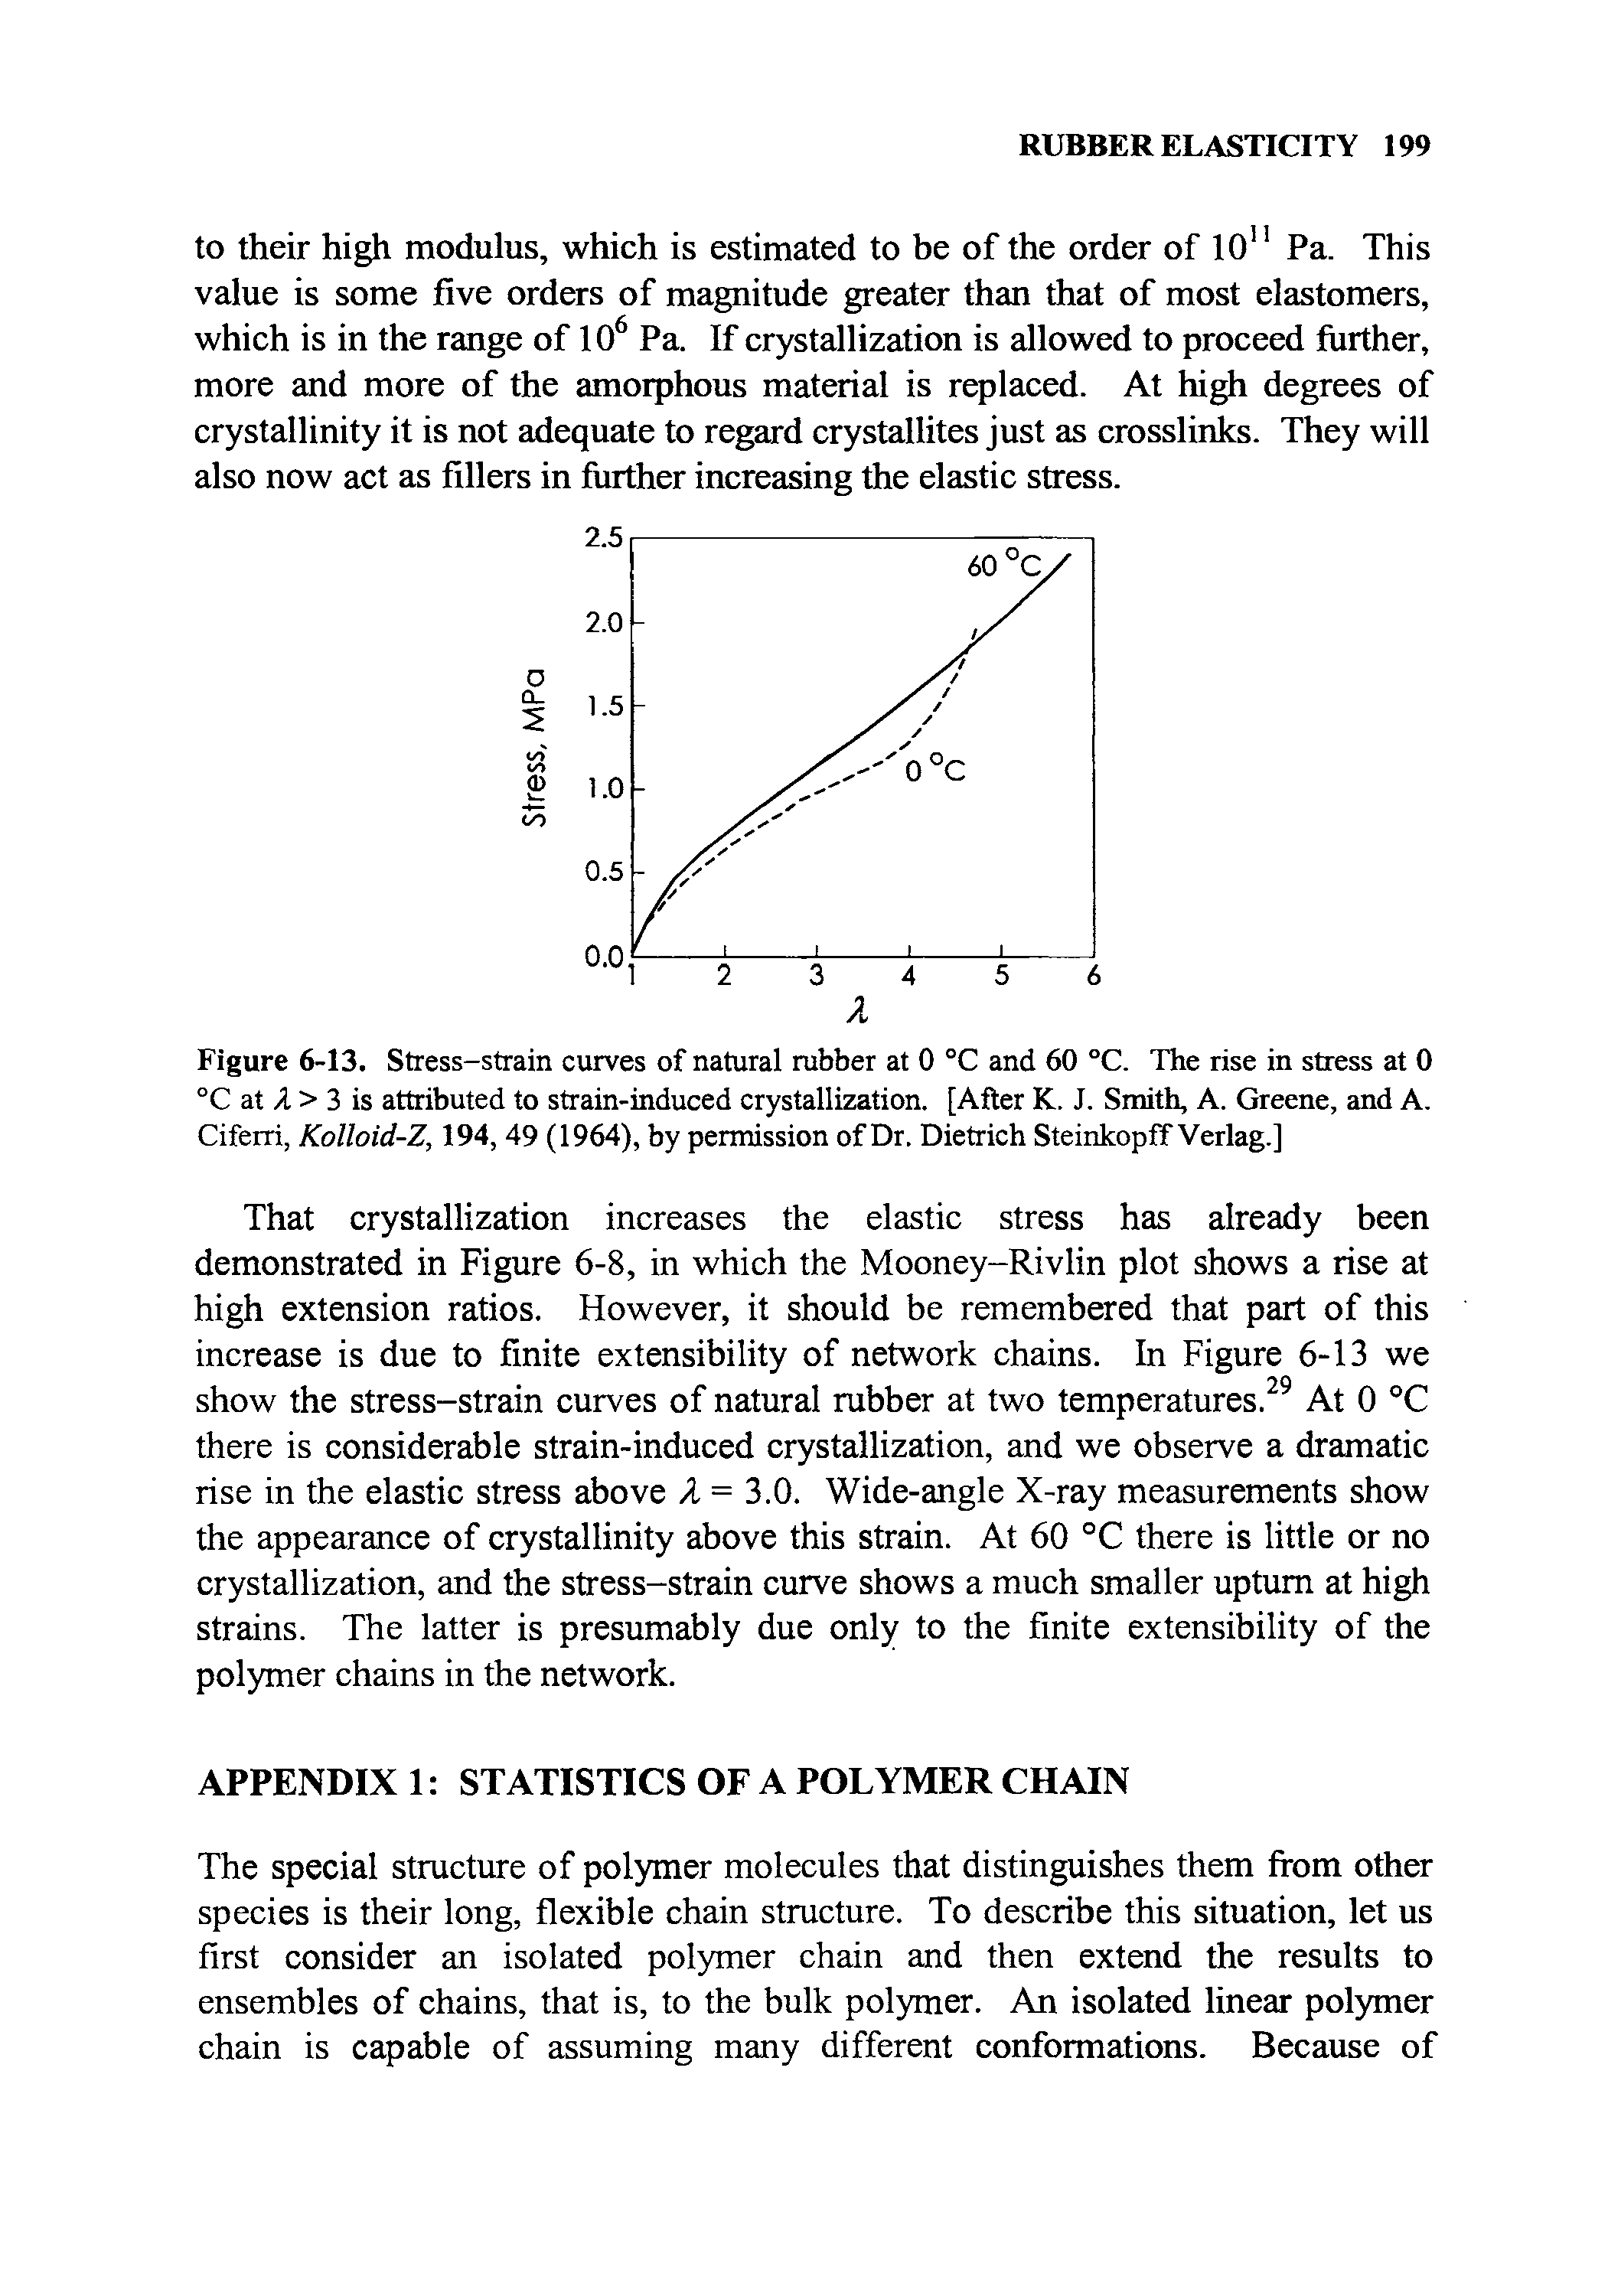 Figure 6-13. Stress-strain curves of natural rubber at 0 °C and 60 °C. The rise in stress at 0 °C at A > 3 is attributed to strain-induced crystallization. [After K. J. Smith, A. Greene, and A. Ciferri, Kolloid-Z, 194, 49 (1964), by permission of Dr. Dietrich SteinkopfTVerlag.]...